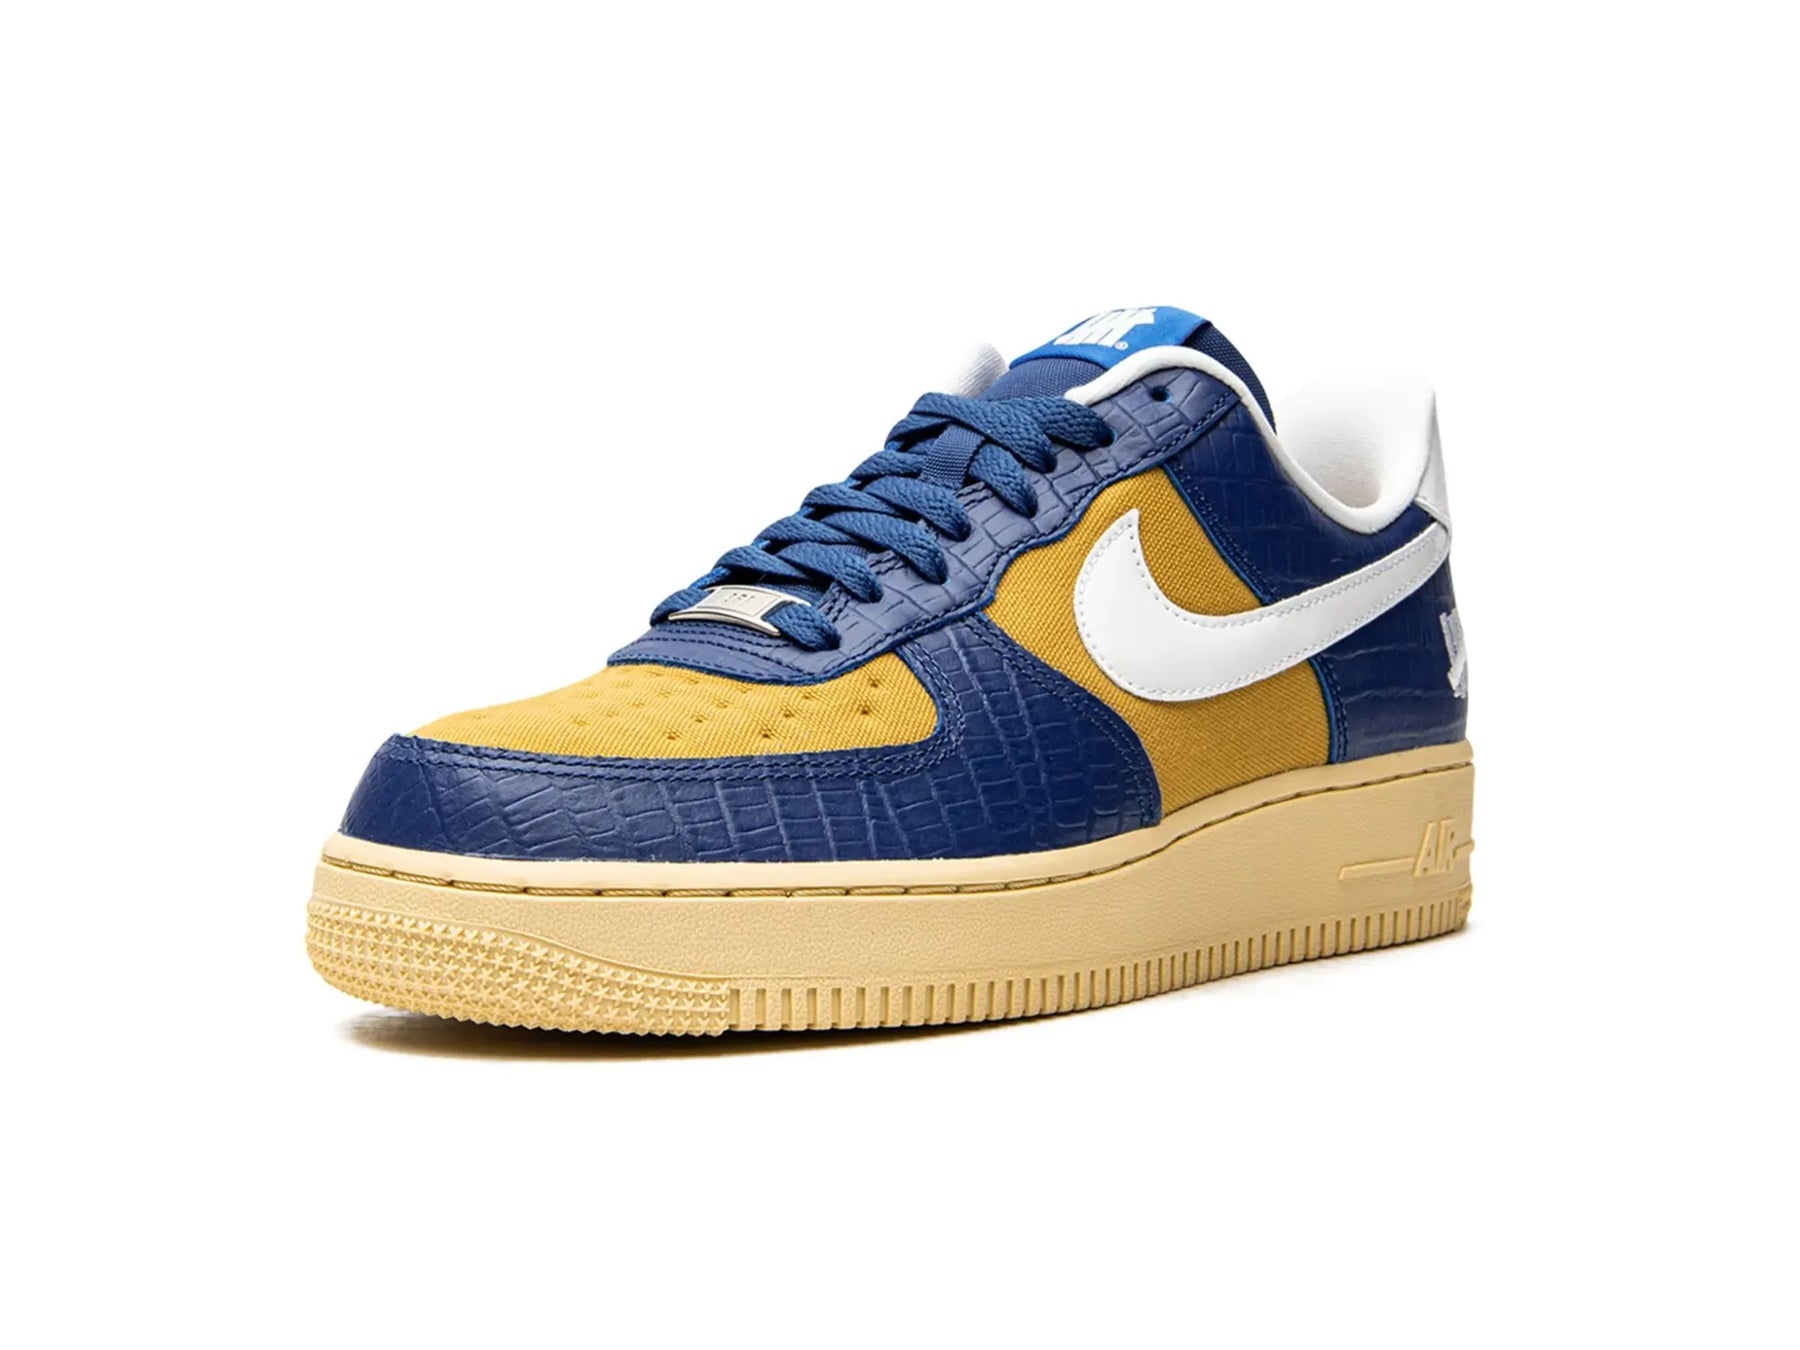 Nike Air Force 1 X UNDEFEATED "5 On It Yellow Croc" - street-bill.dk